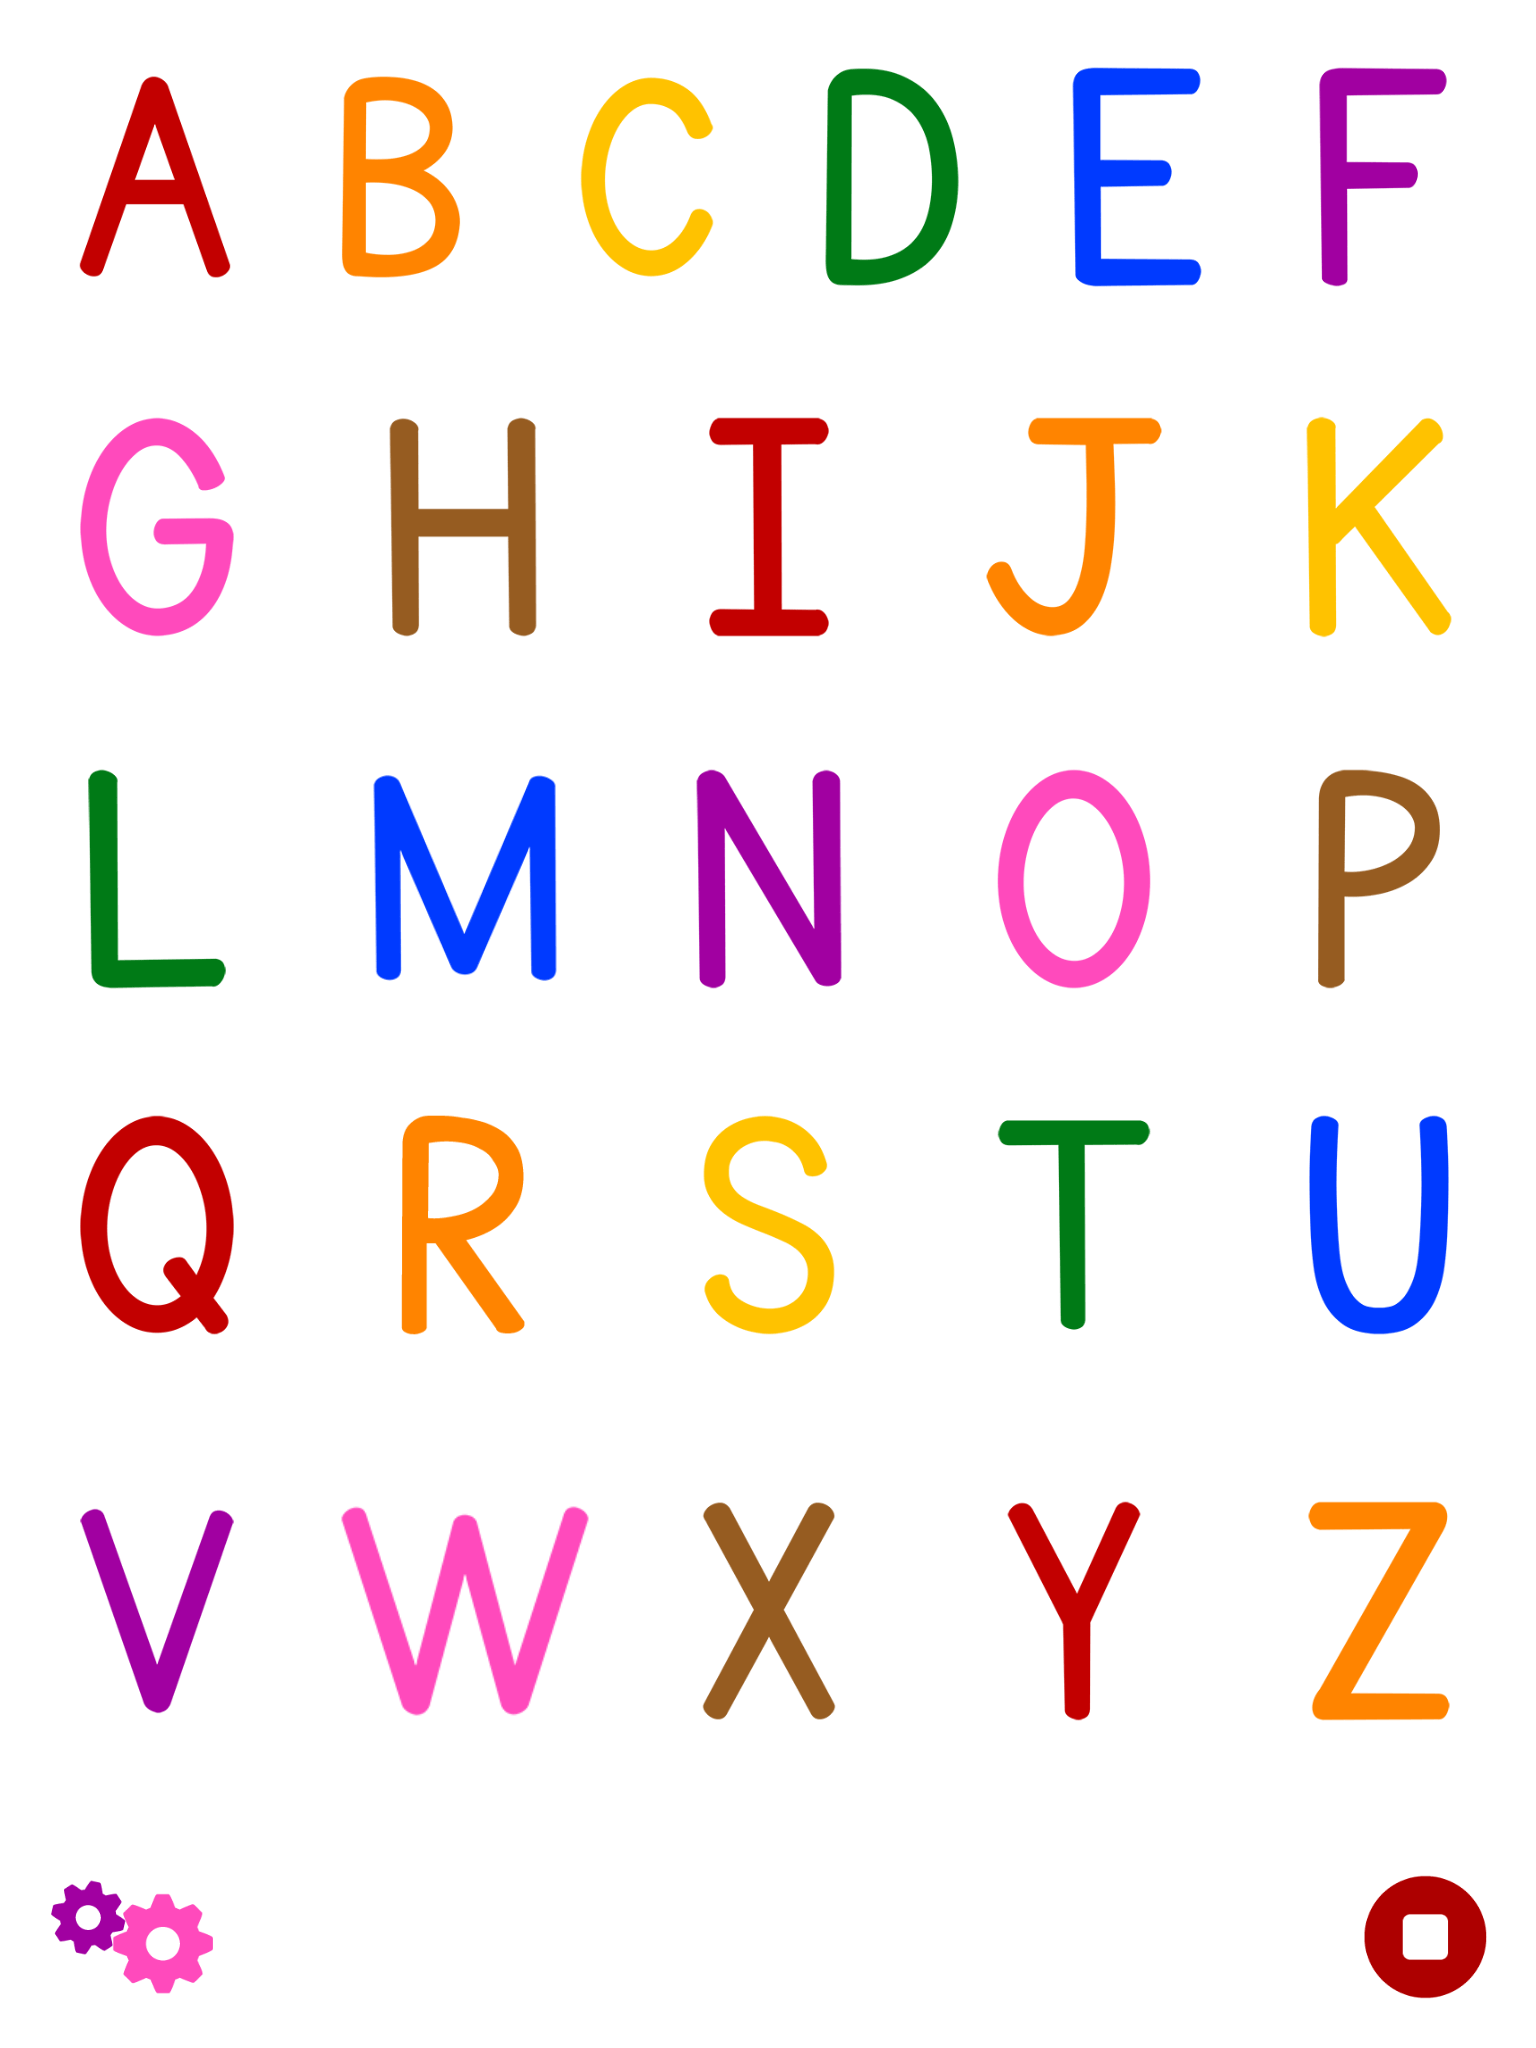 free-chart-and-flash-cards-for-learning-the-alphabet-teachersmag